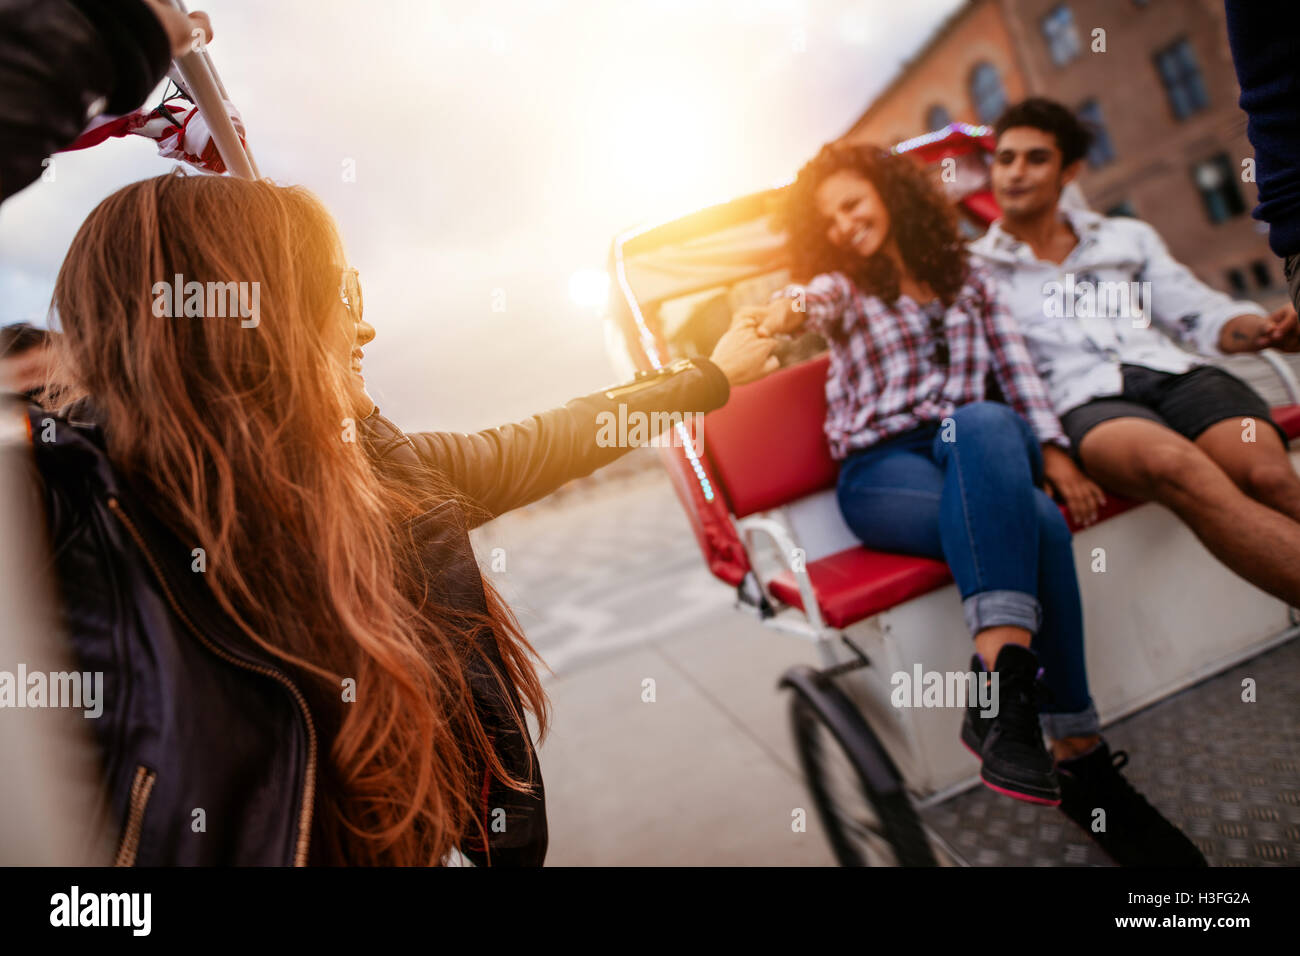 Young people enjoying tricycle ride in the city. Teenagers riding on tricycle on road, with woman holding hand of female friend. Stock Photo